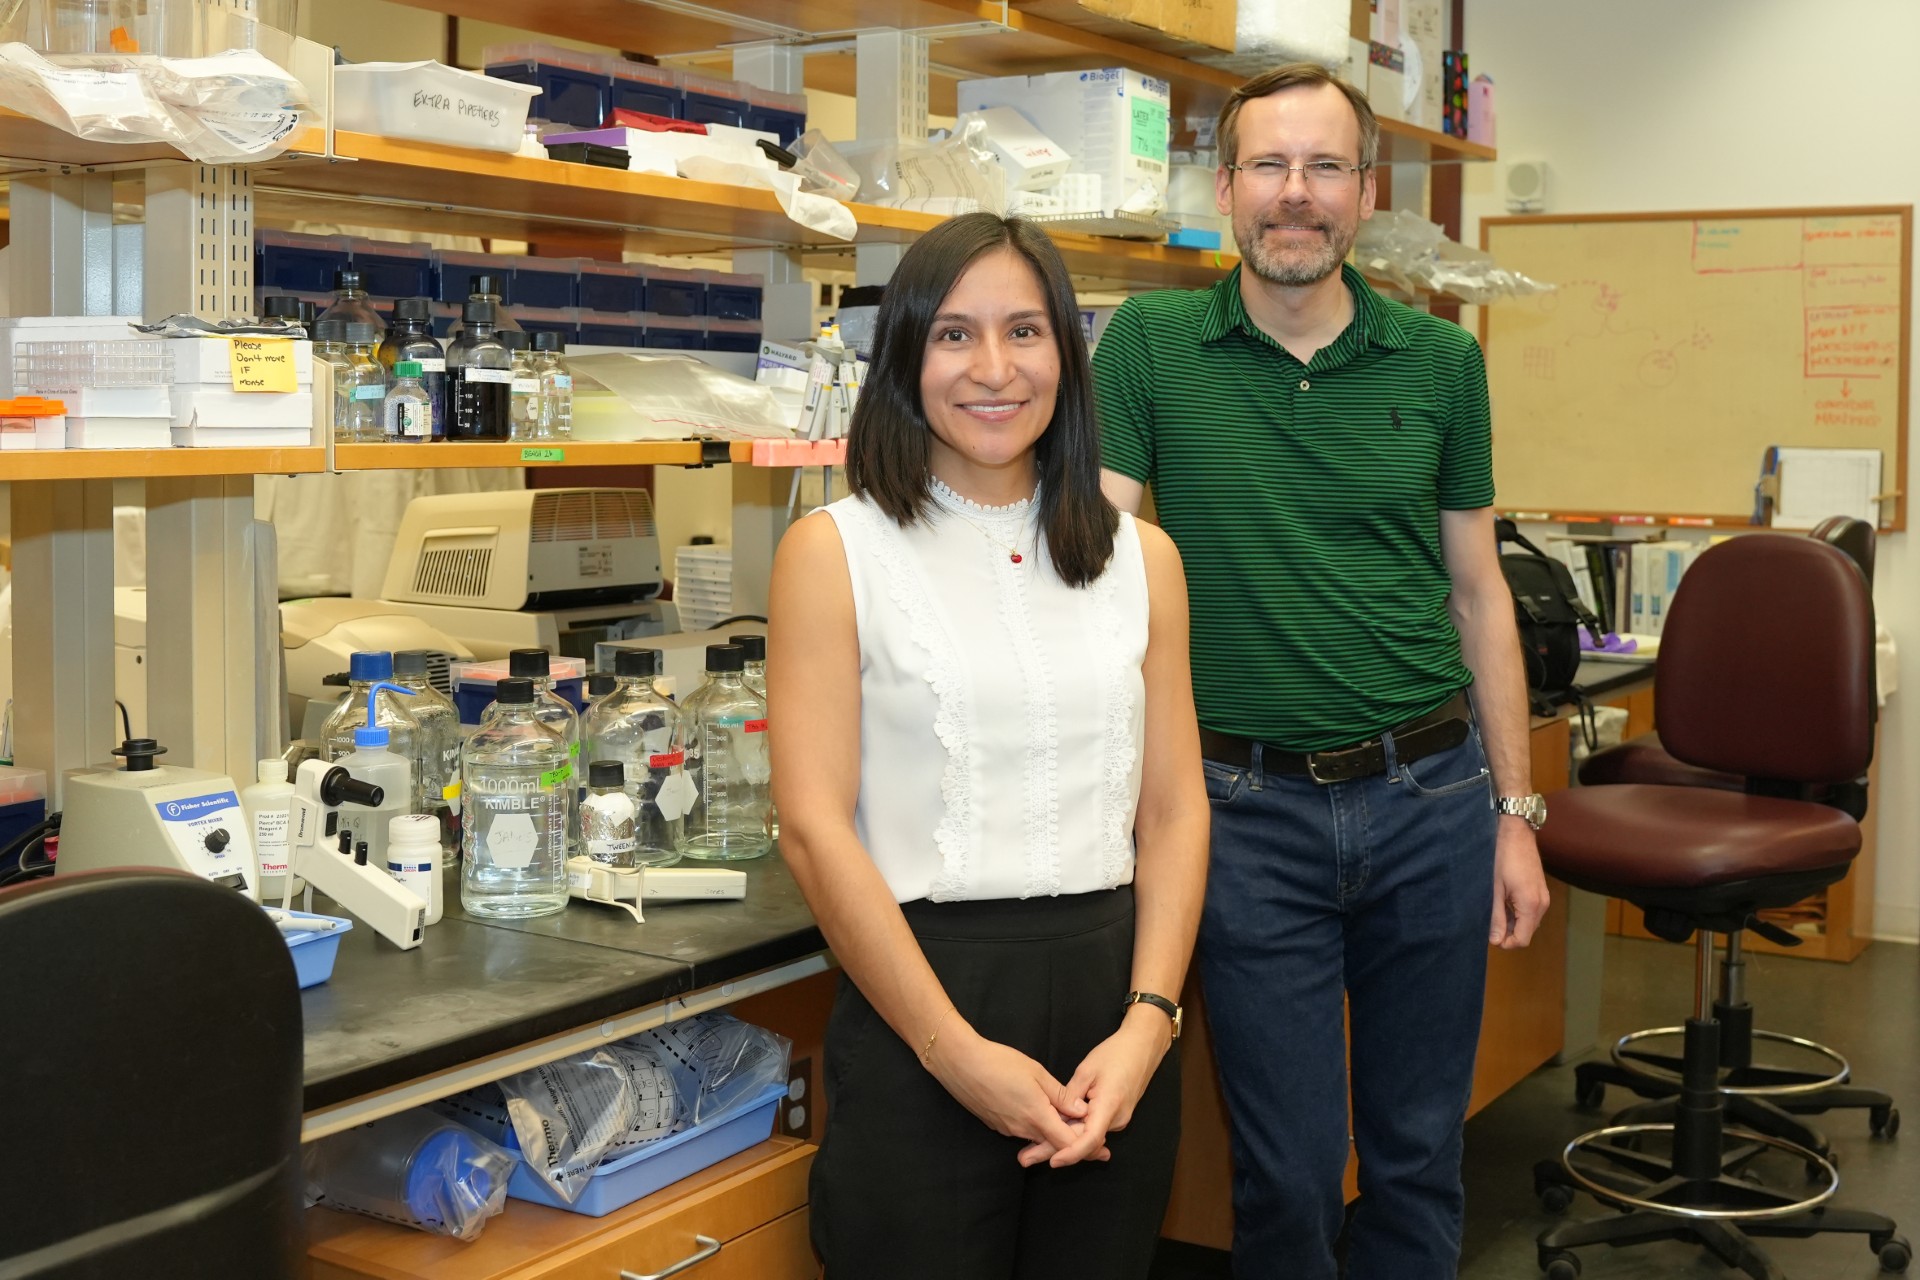 The team of faculty mentor Kevin Janes and doctoral student Catalina Alvarez Yela are among those at UVA leading the fight against breast cancer. (Photo courtesy of the UVA Cancer Center)